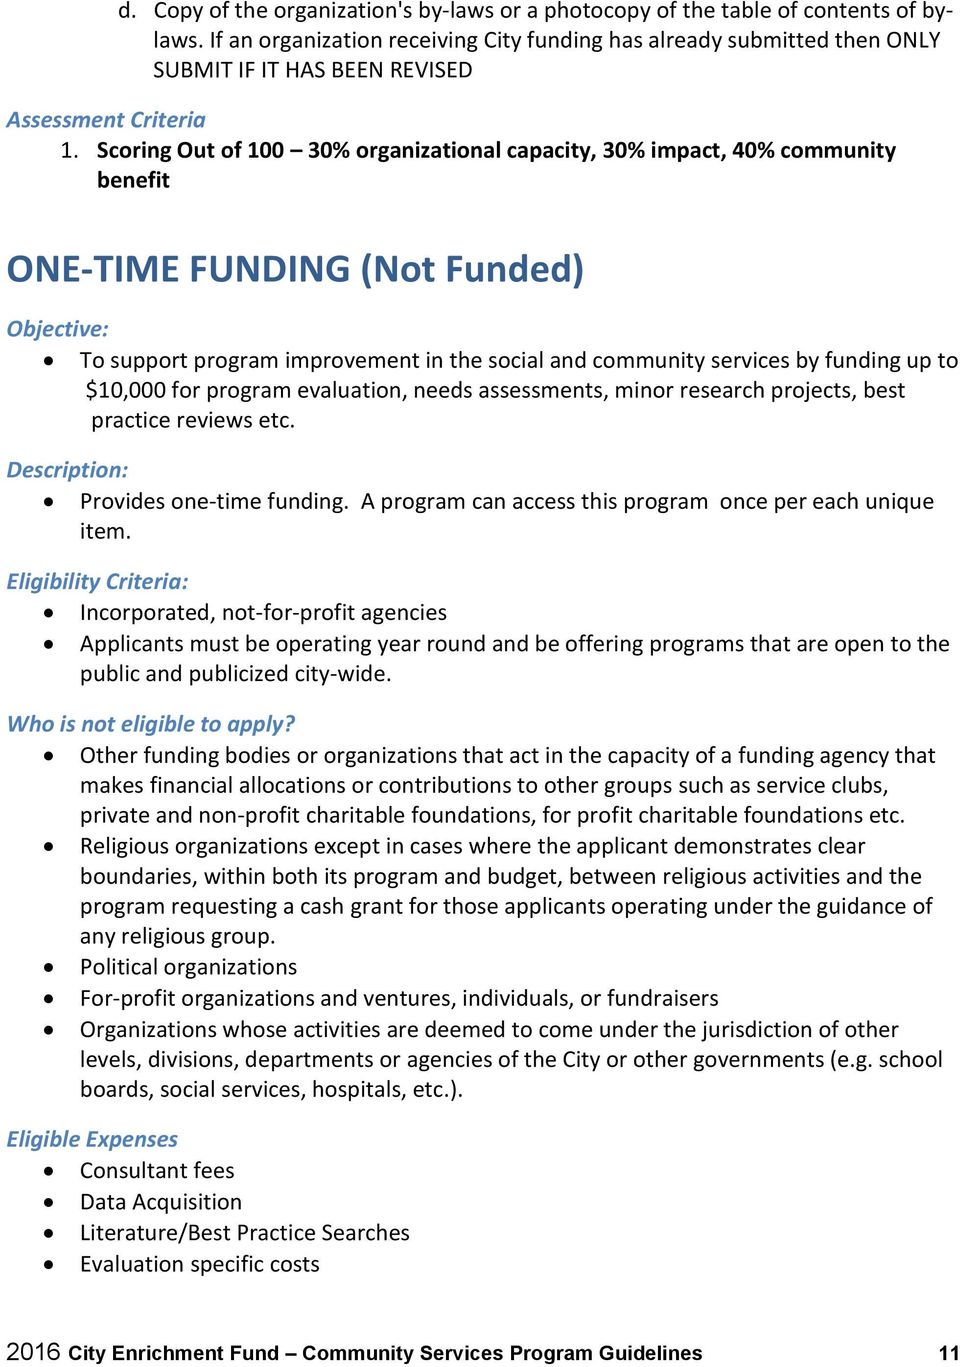 Scoring Out of 100 30% organizational capacity, 30% impact, 40% community benefit ONE-TIME FUNDING (Not Funded) Objective: To support program improvement in the social and community services by